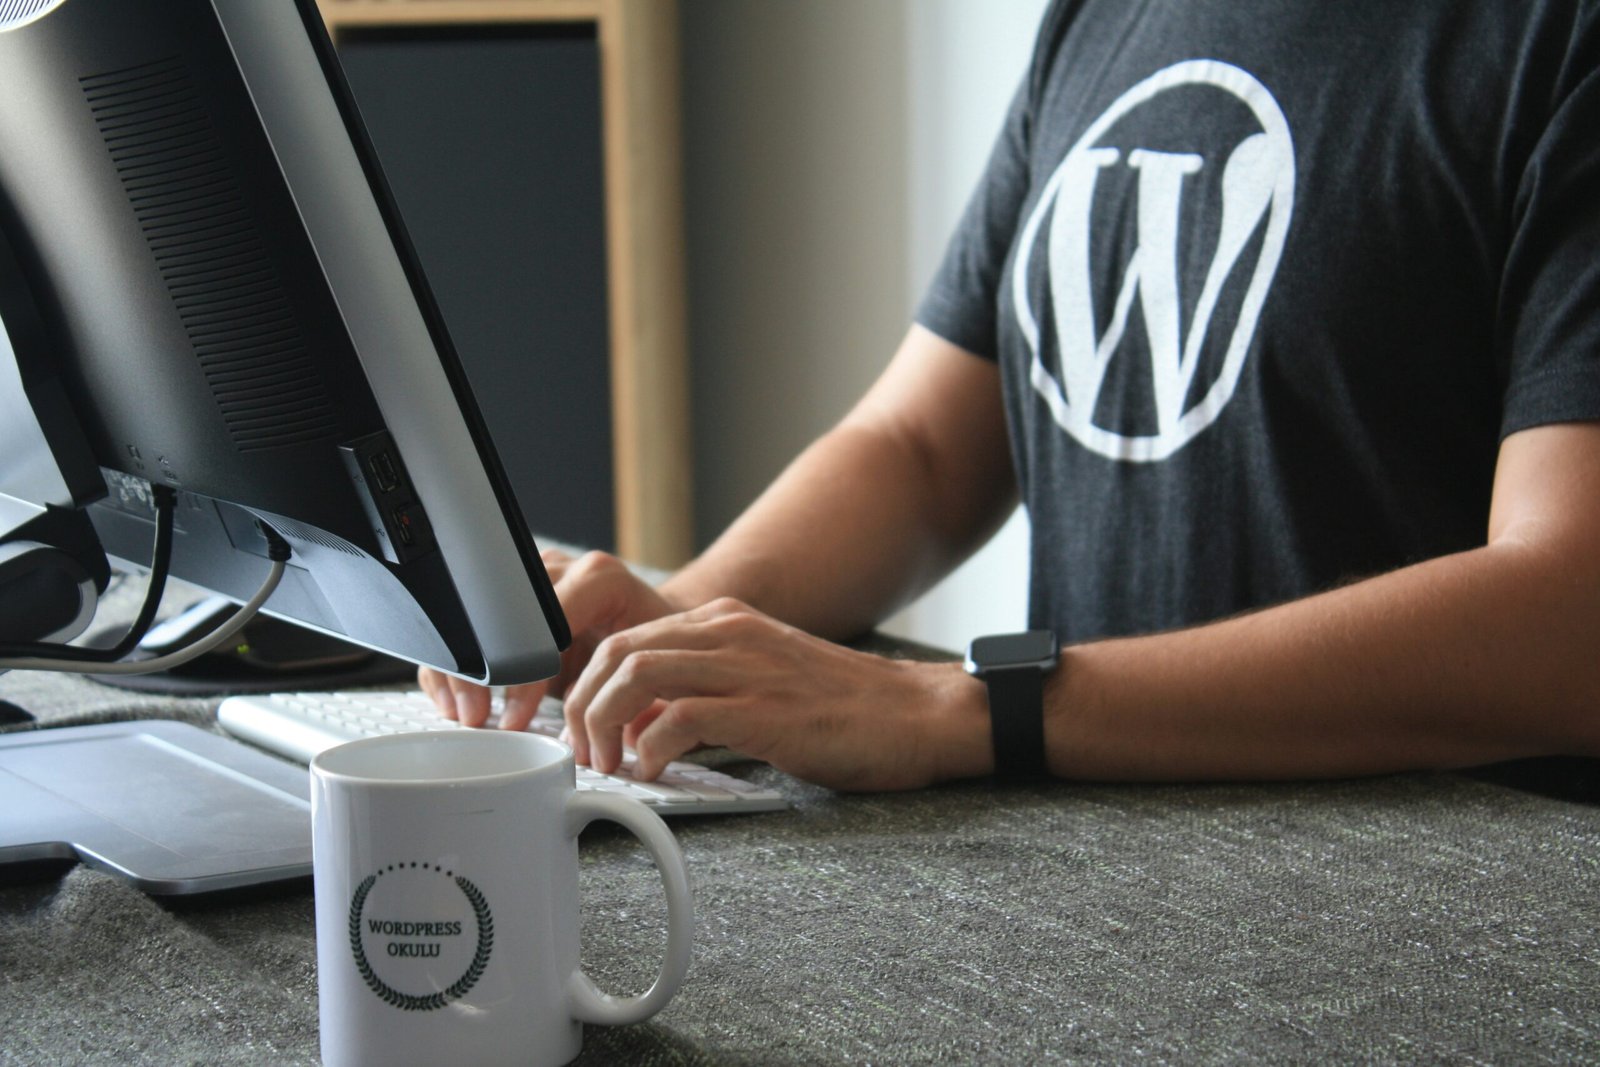 Exciting News: WordPress Mobile Update – Version 24.4